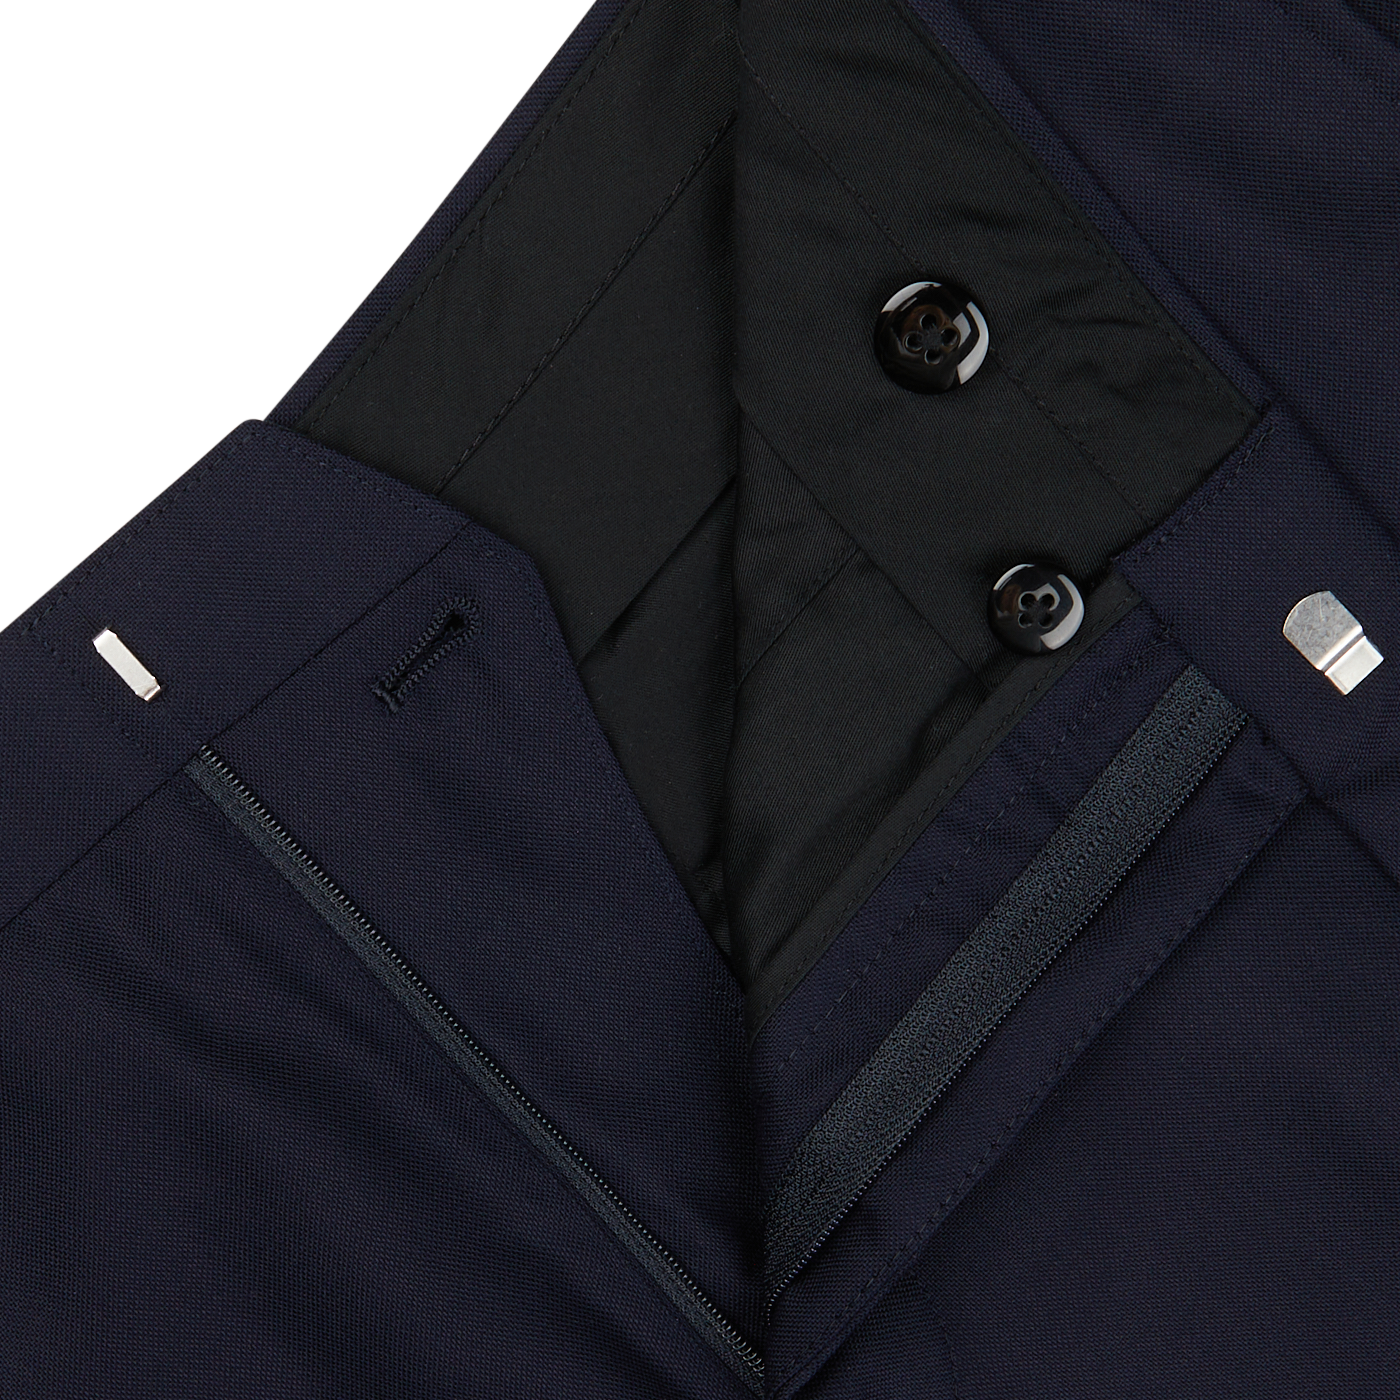 Close-up of a Baltzar Sartorial dark navy blue jacket with zipper and button details, featuring tailored seams and quilted lining.